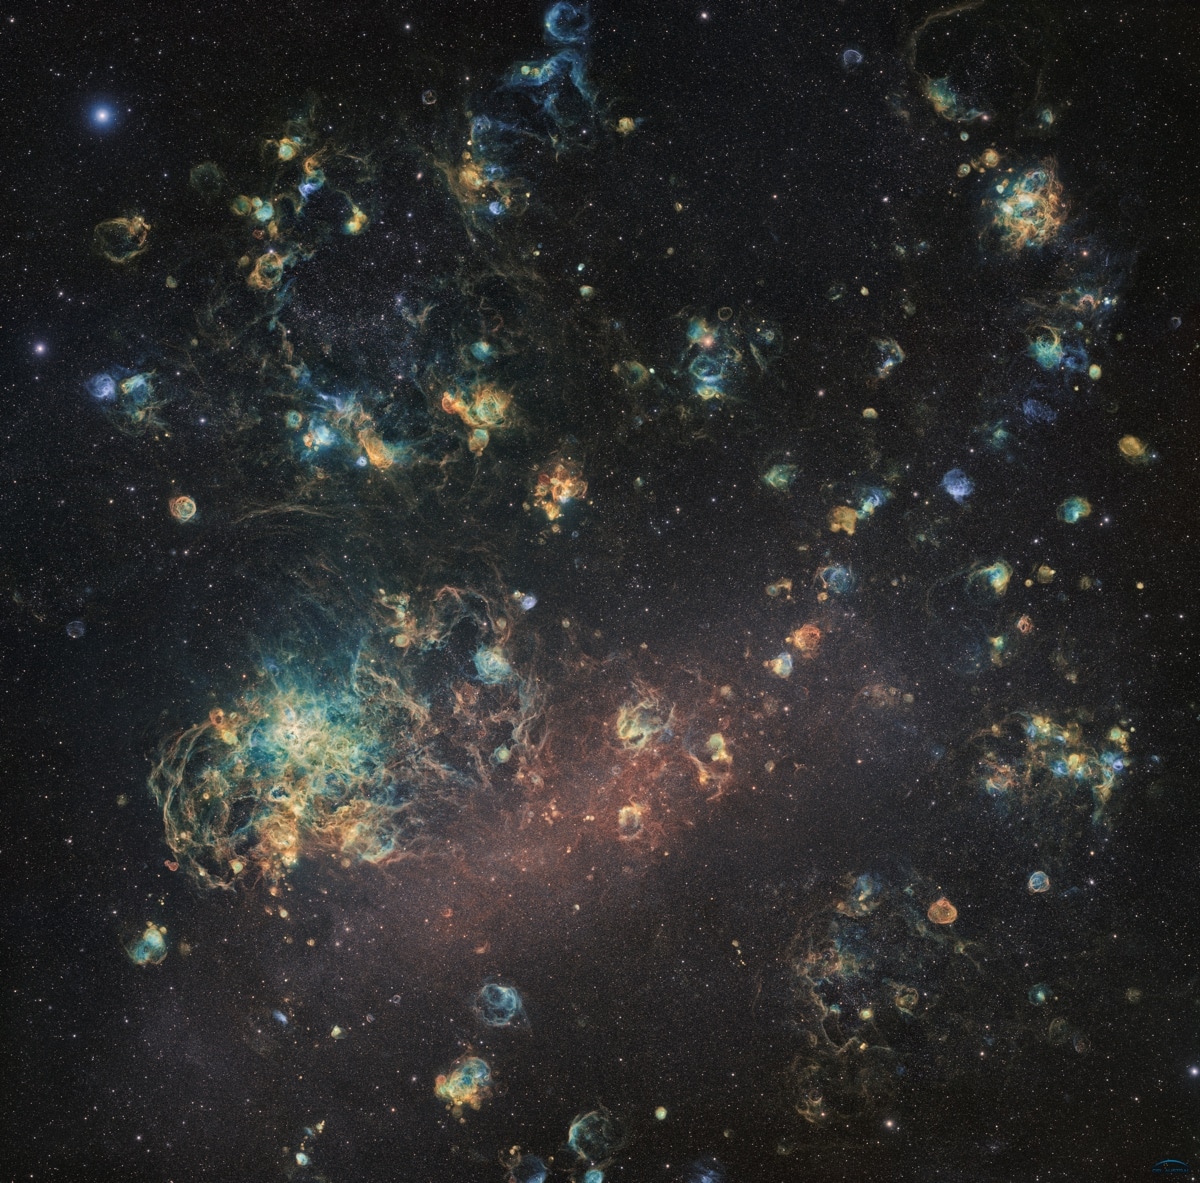 Mesmerizing Photo Of The Galaxy That Took 1,060 Hours To Capture